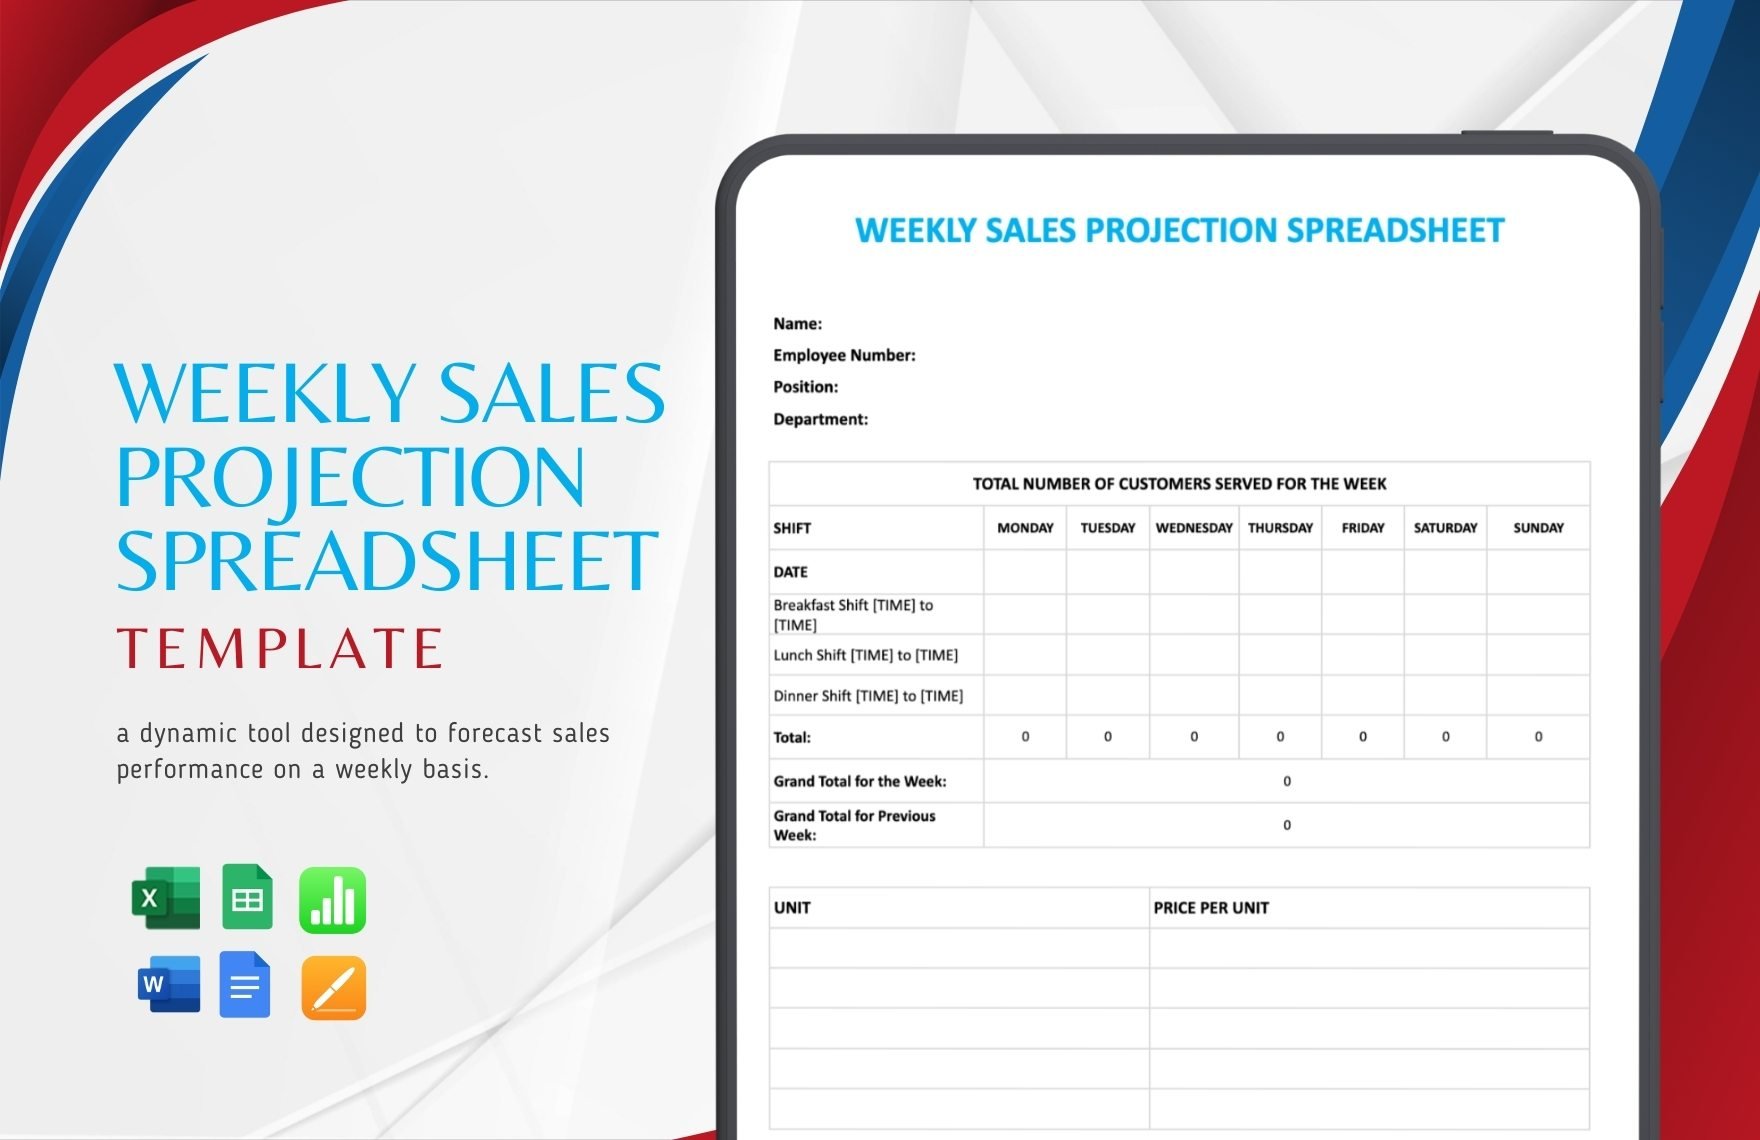 Weekly Sales Projection Spreadsheet Template in Word, Google Docs, Excel, Google Sheets, Apple Pages, Apple Numbers